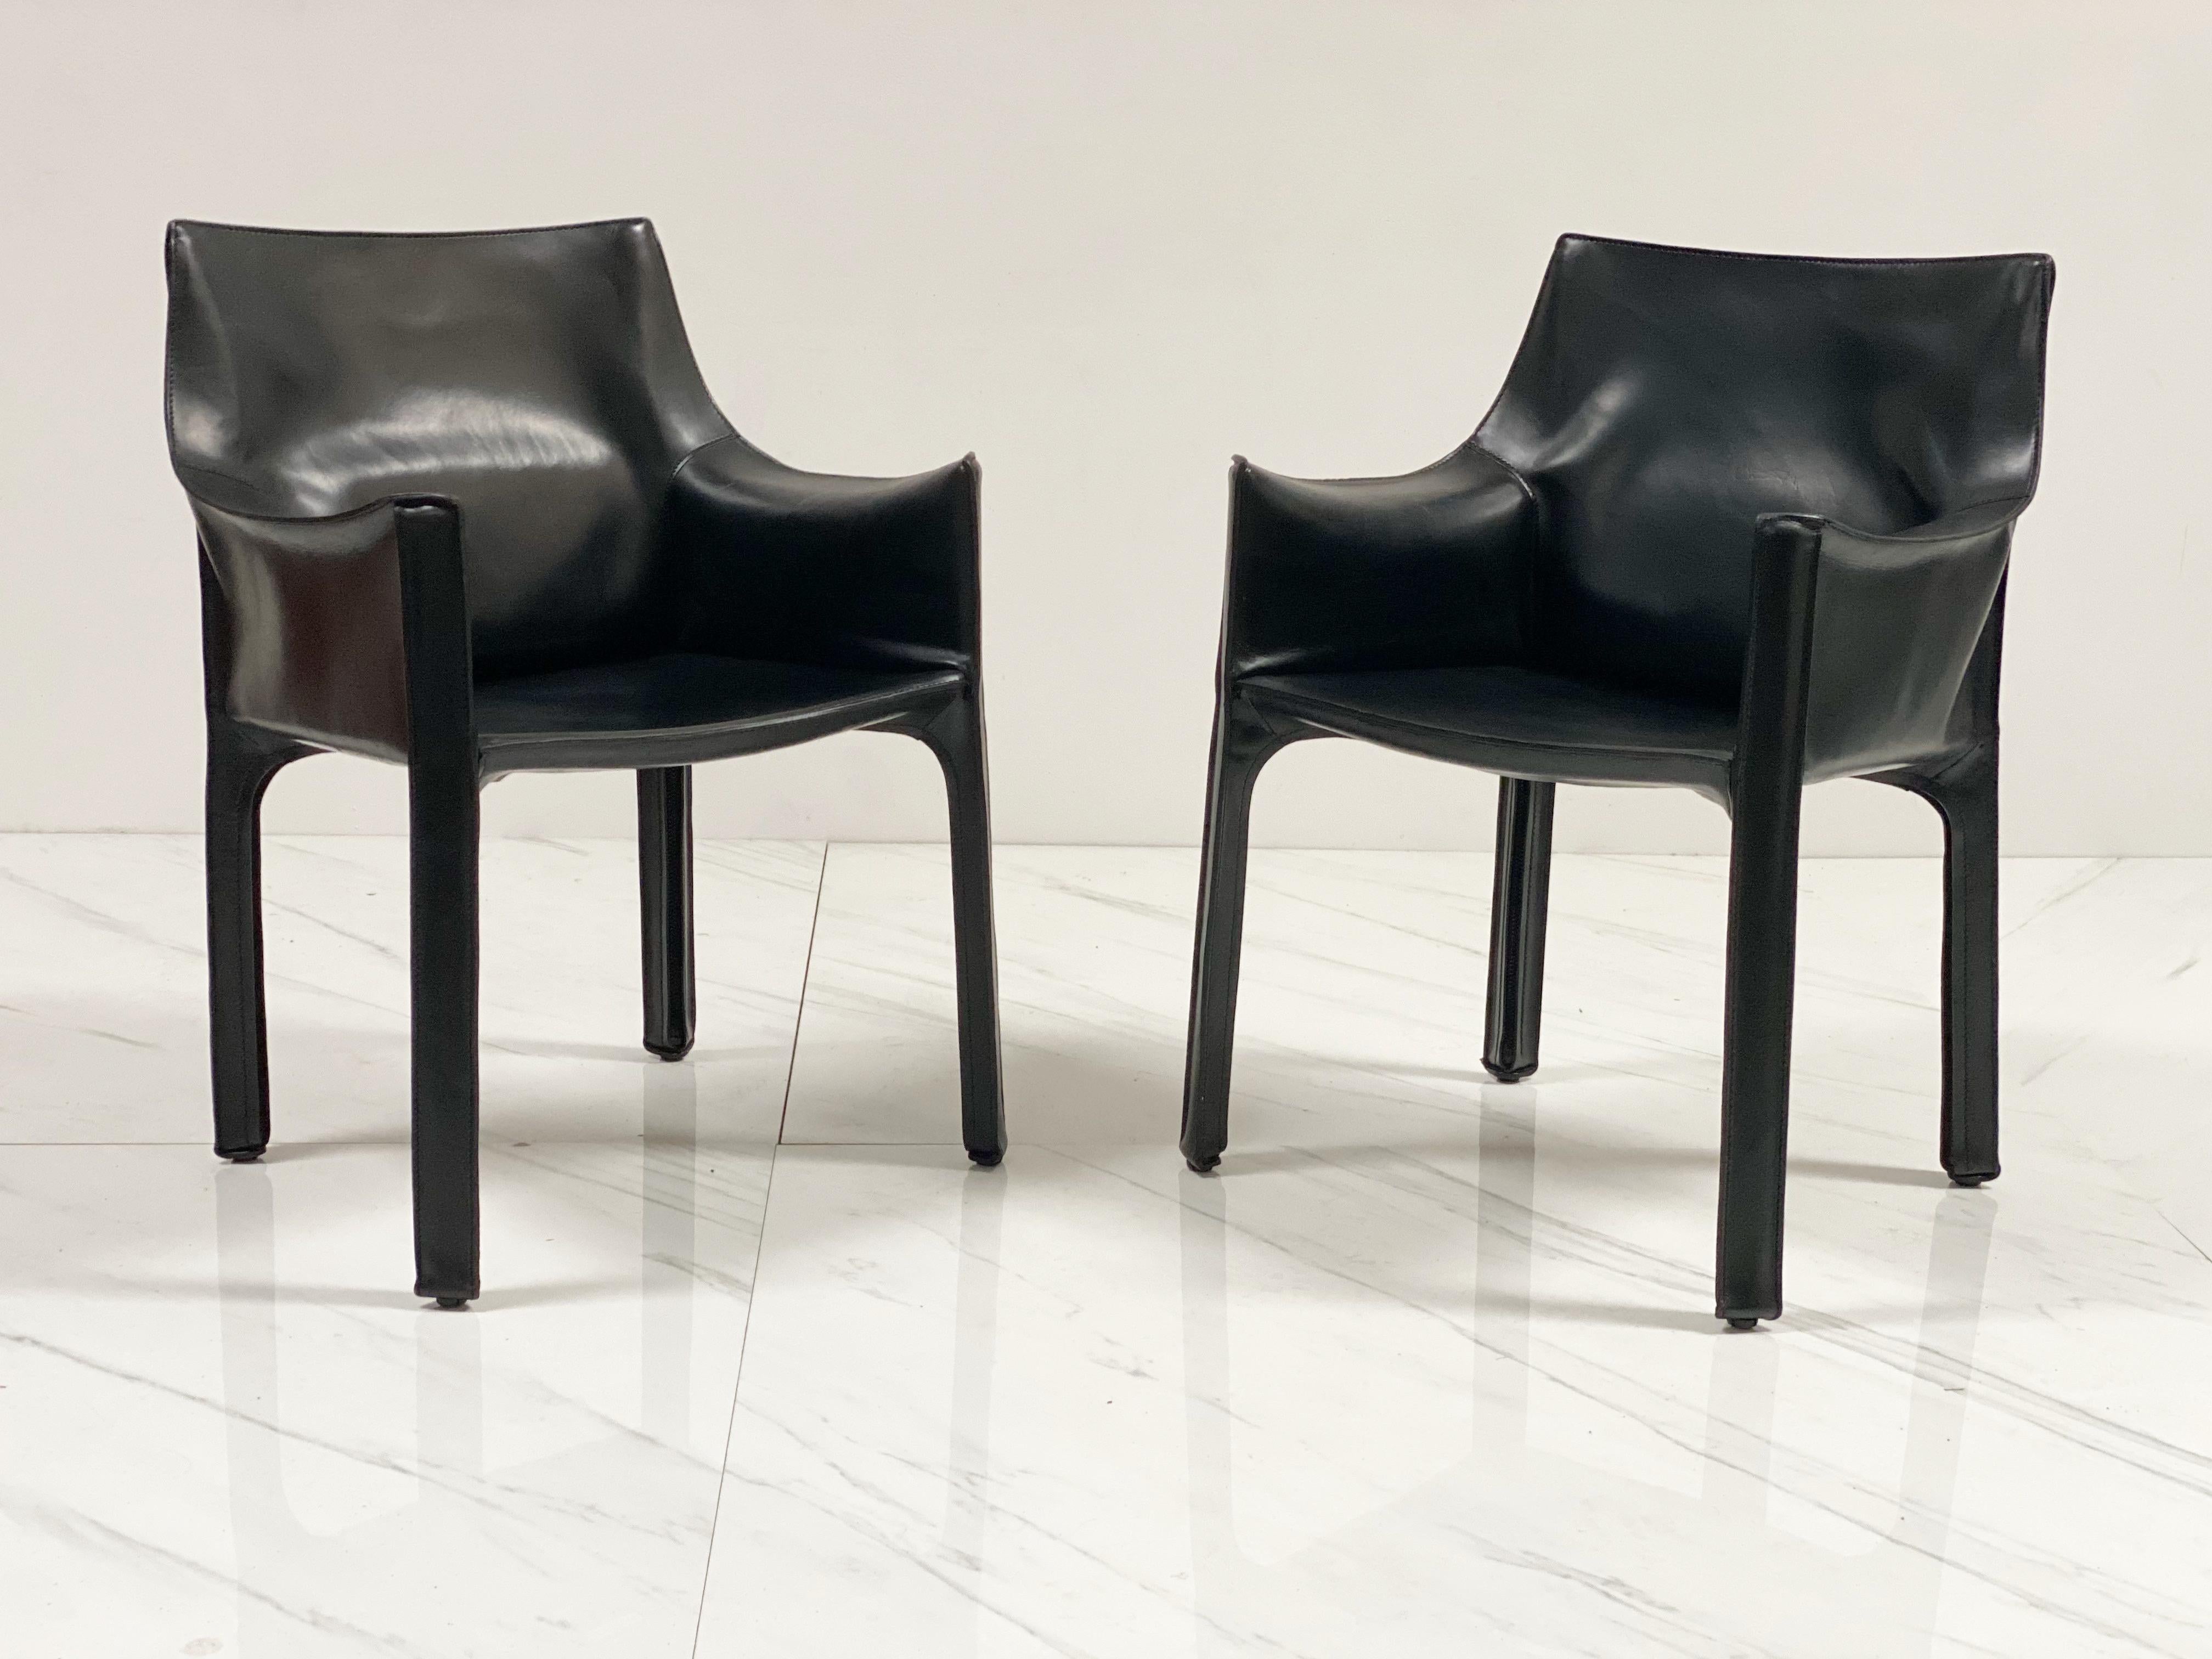 Late 20th Century Early Production 'Cab' Armchairs by Mario Bellini for Cassina, c 1978, Signed